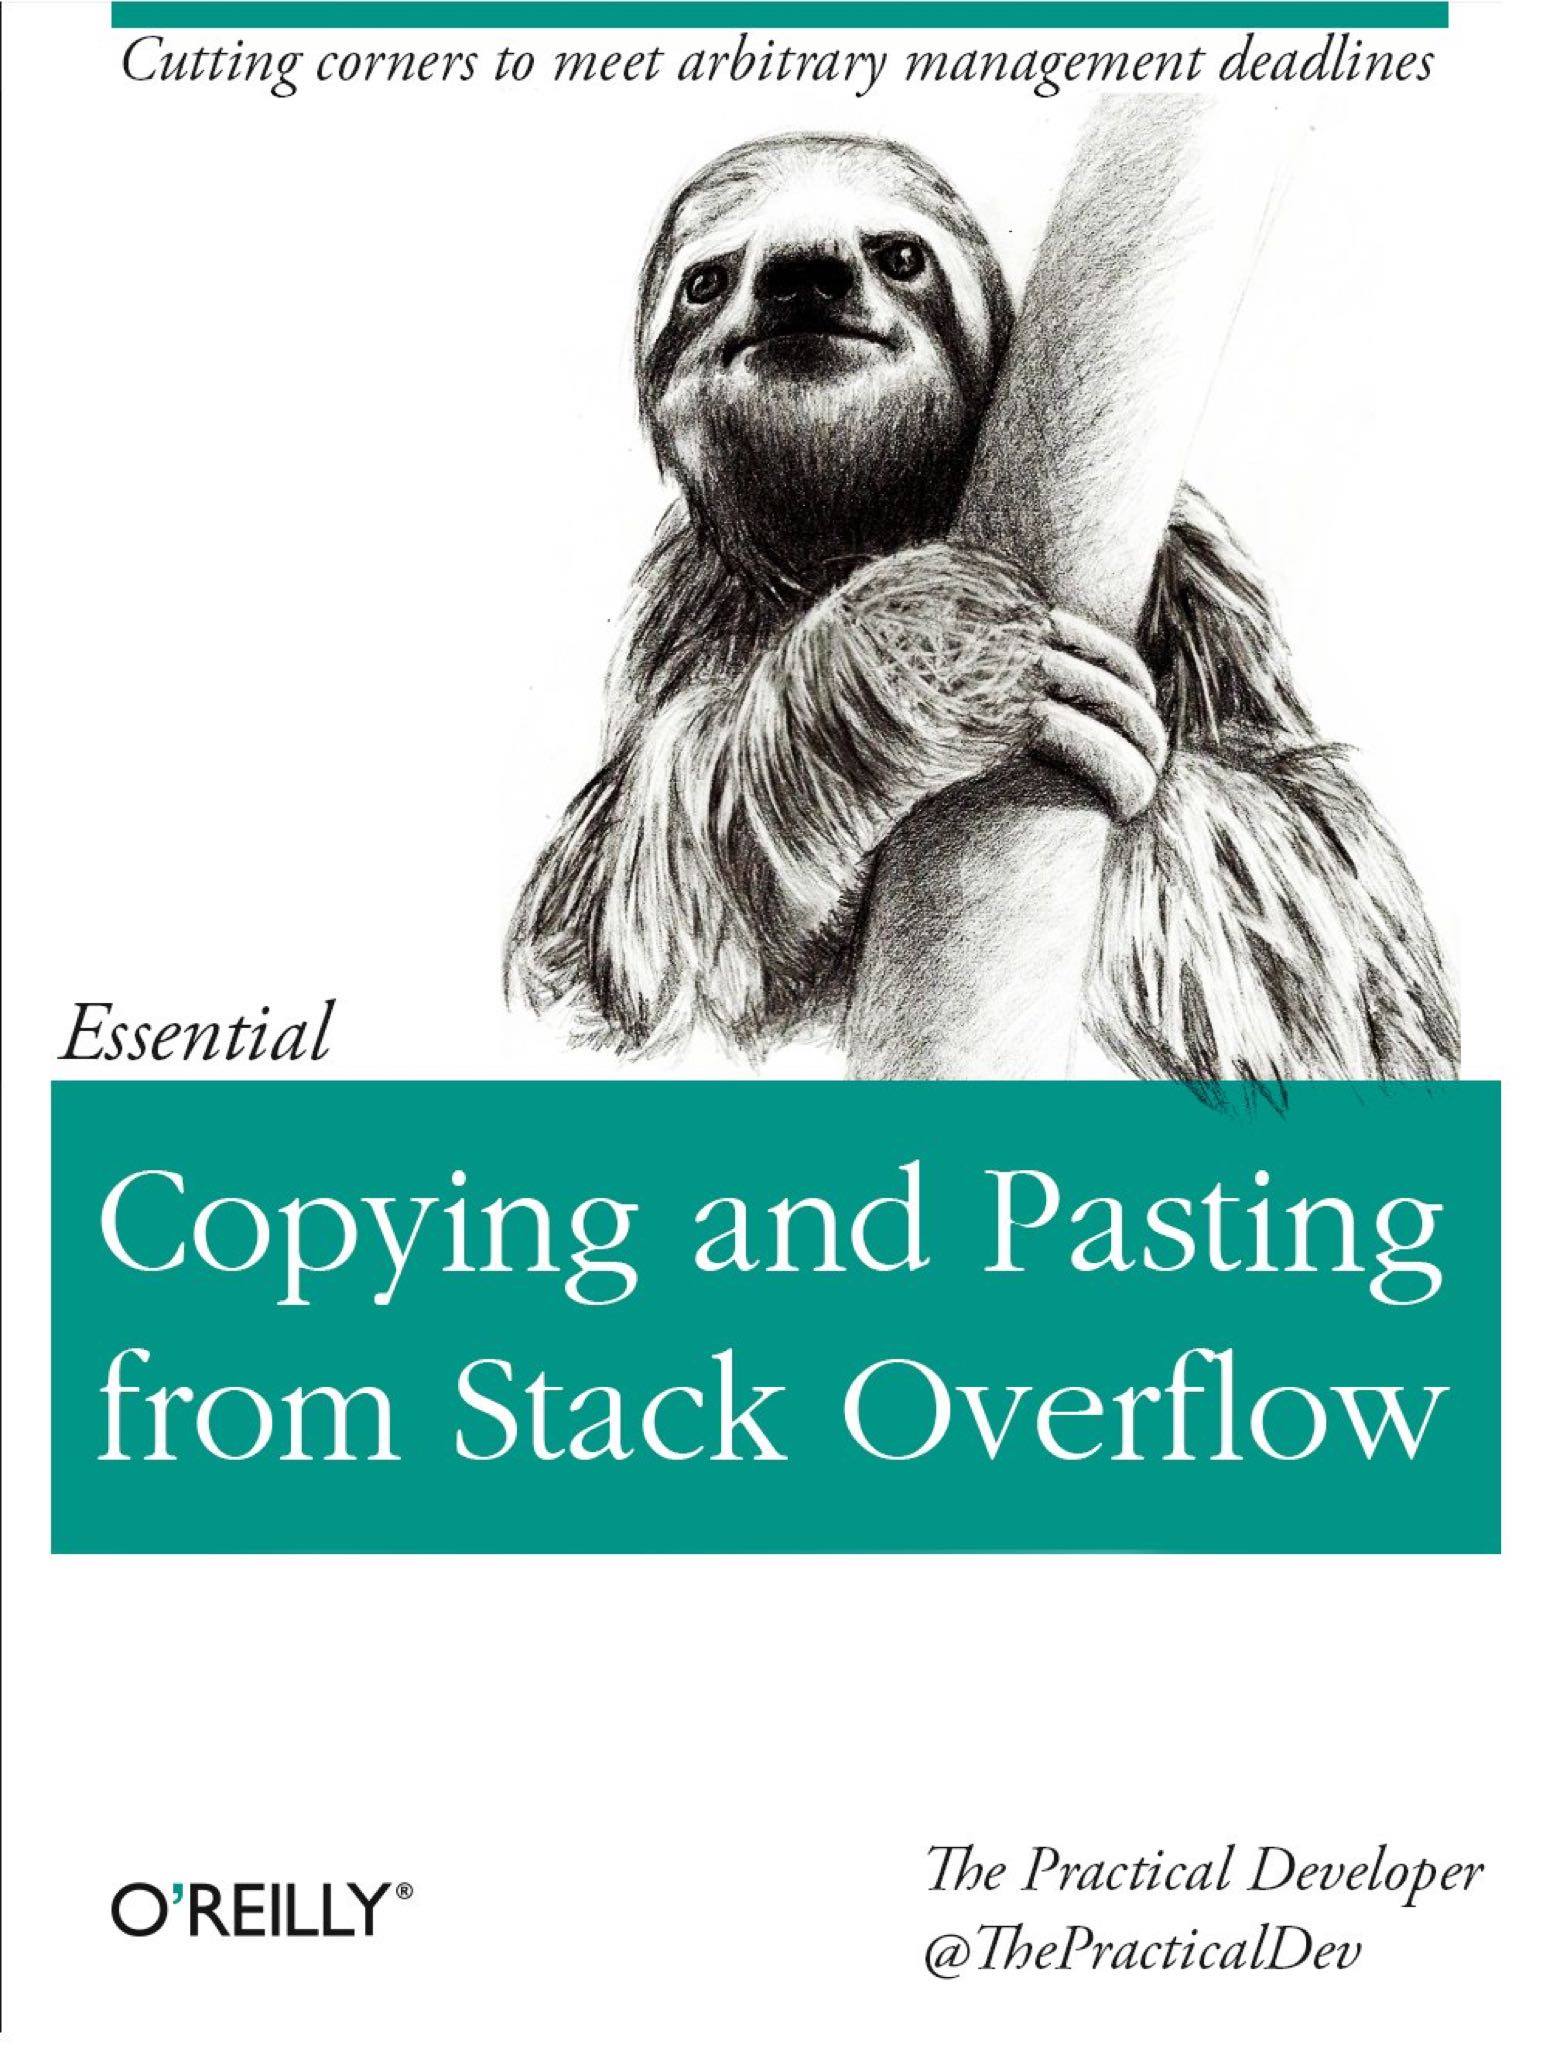 Copying and Pasting from Stack Overflow